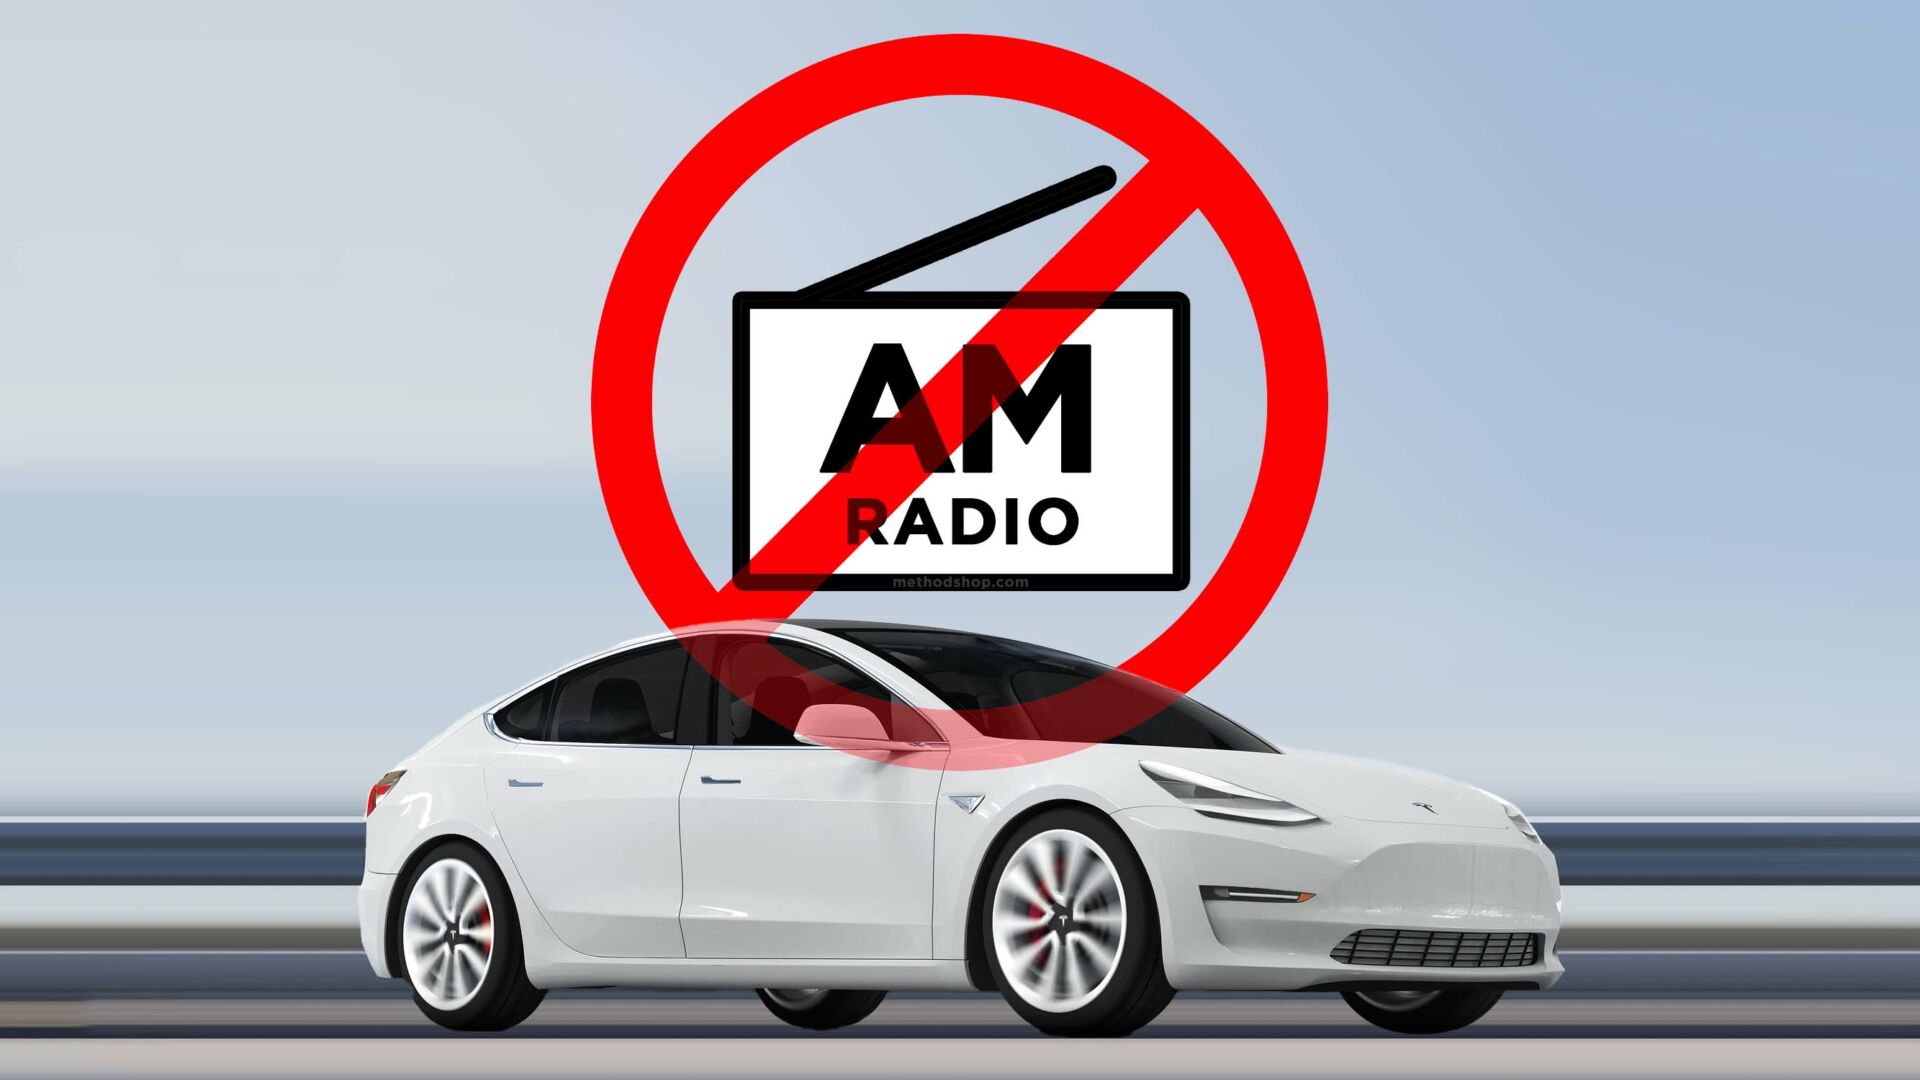 There's no AM Radio In Tesla Cars